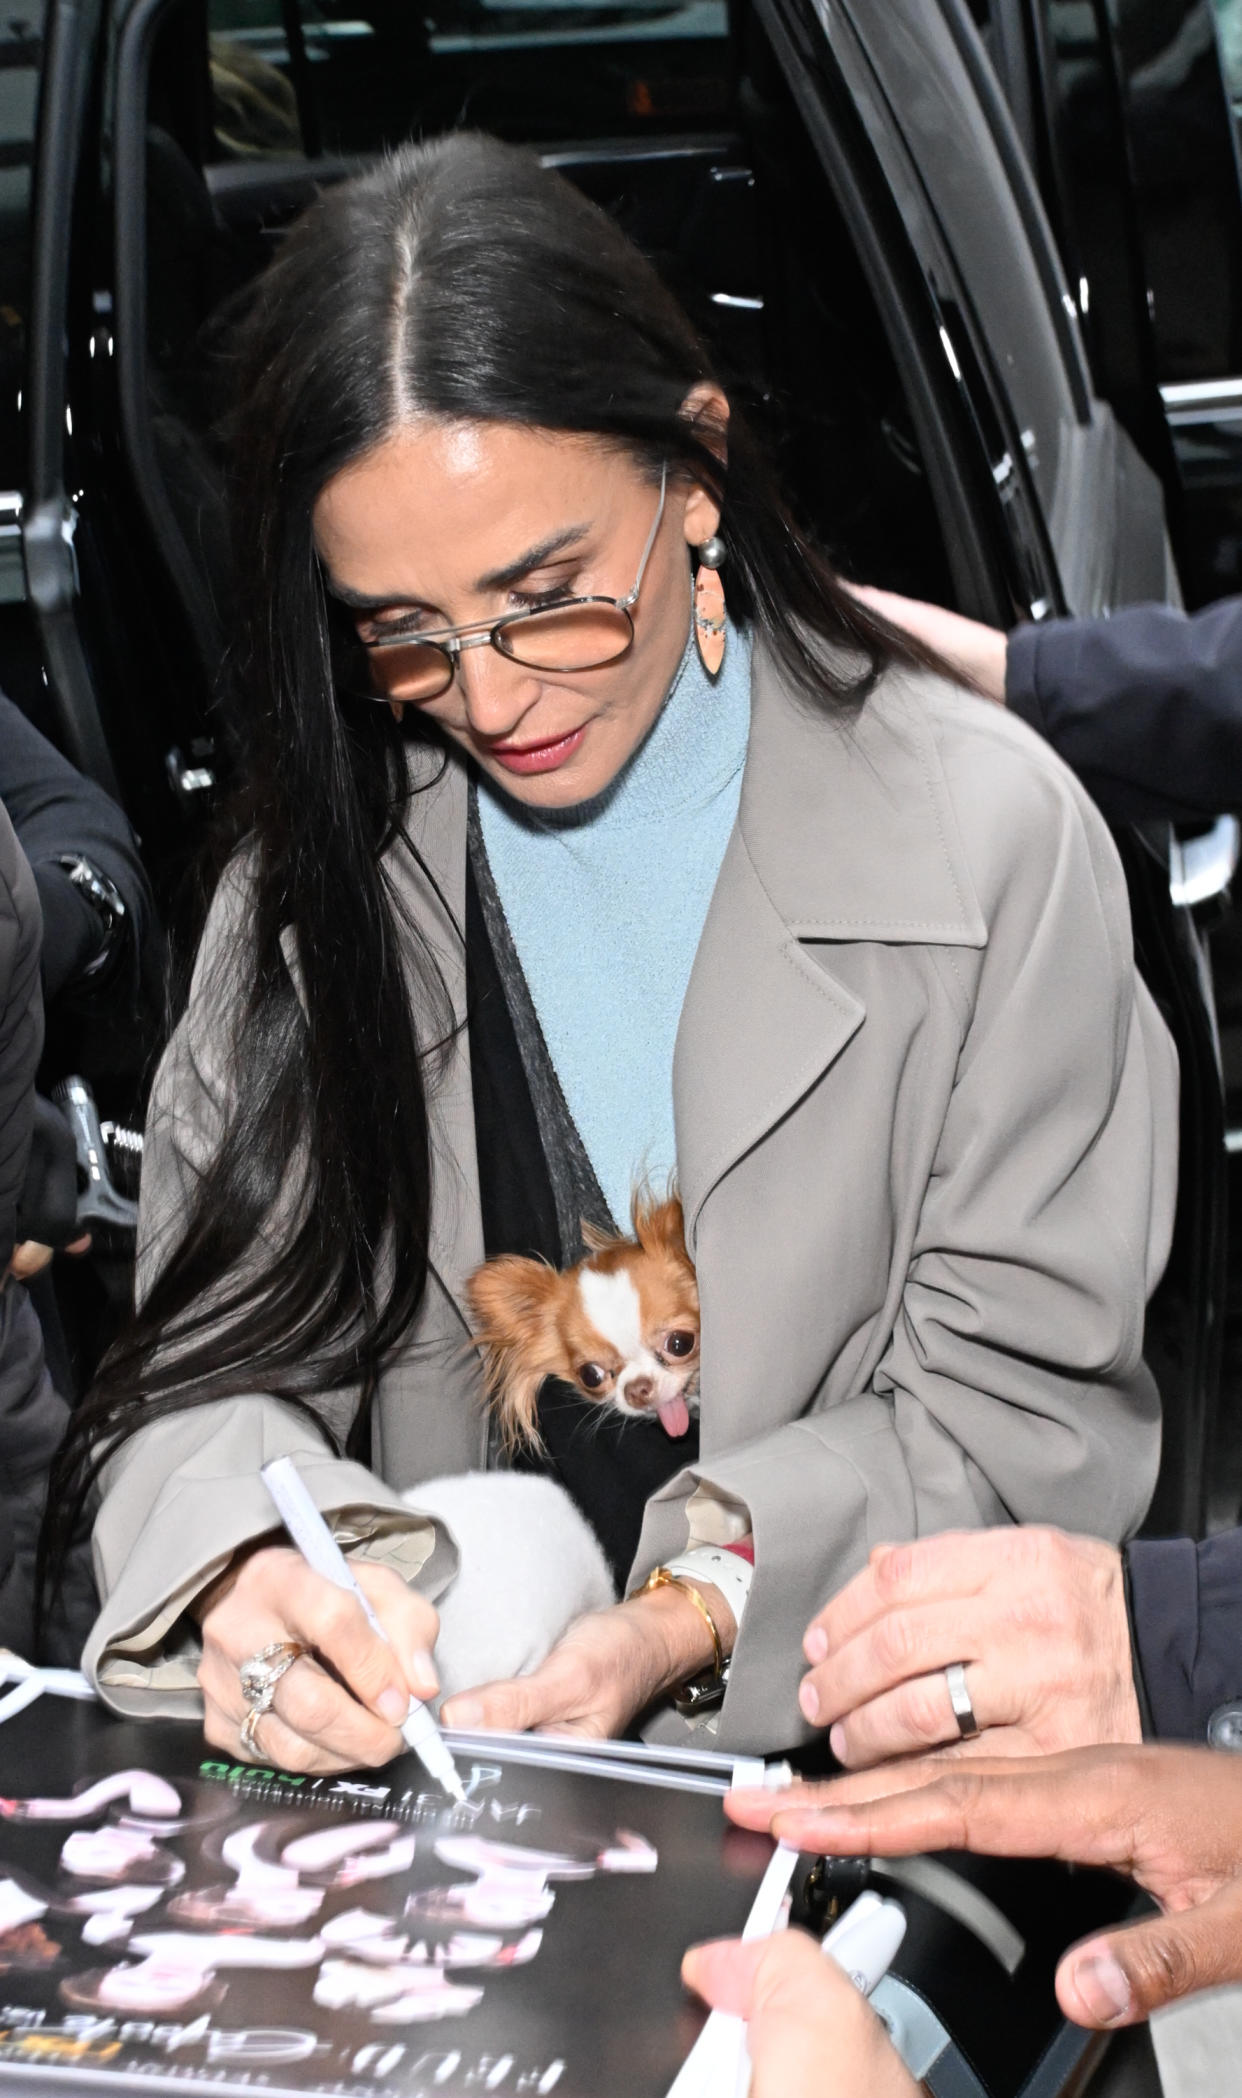 Pilaf, peeking out from Moore’s jacket, watches as the actress signs autographs.